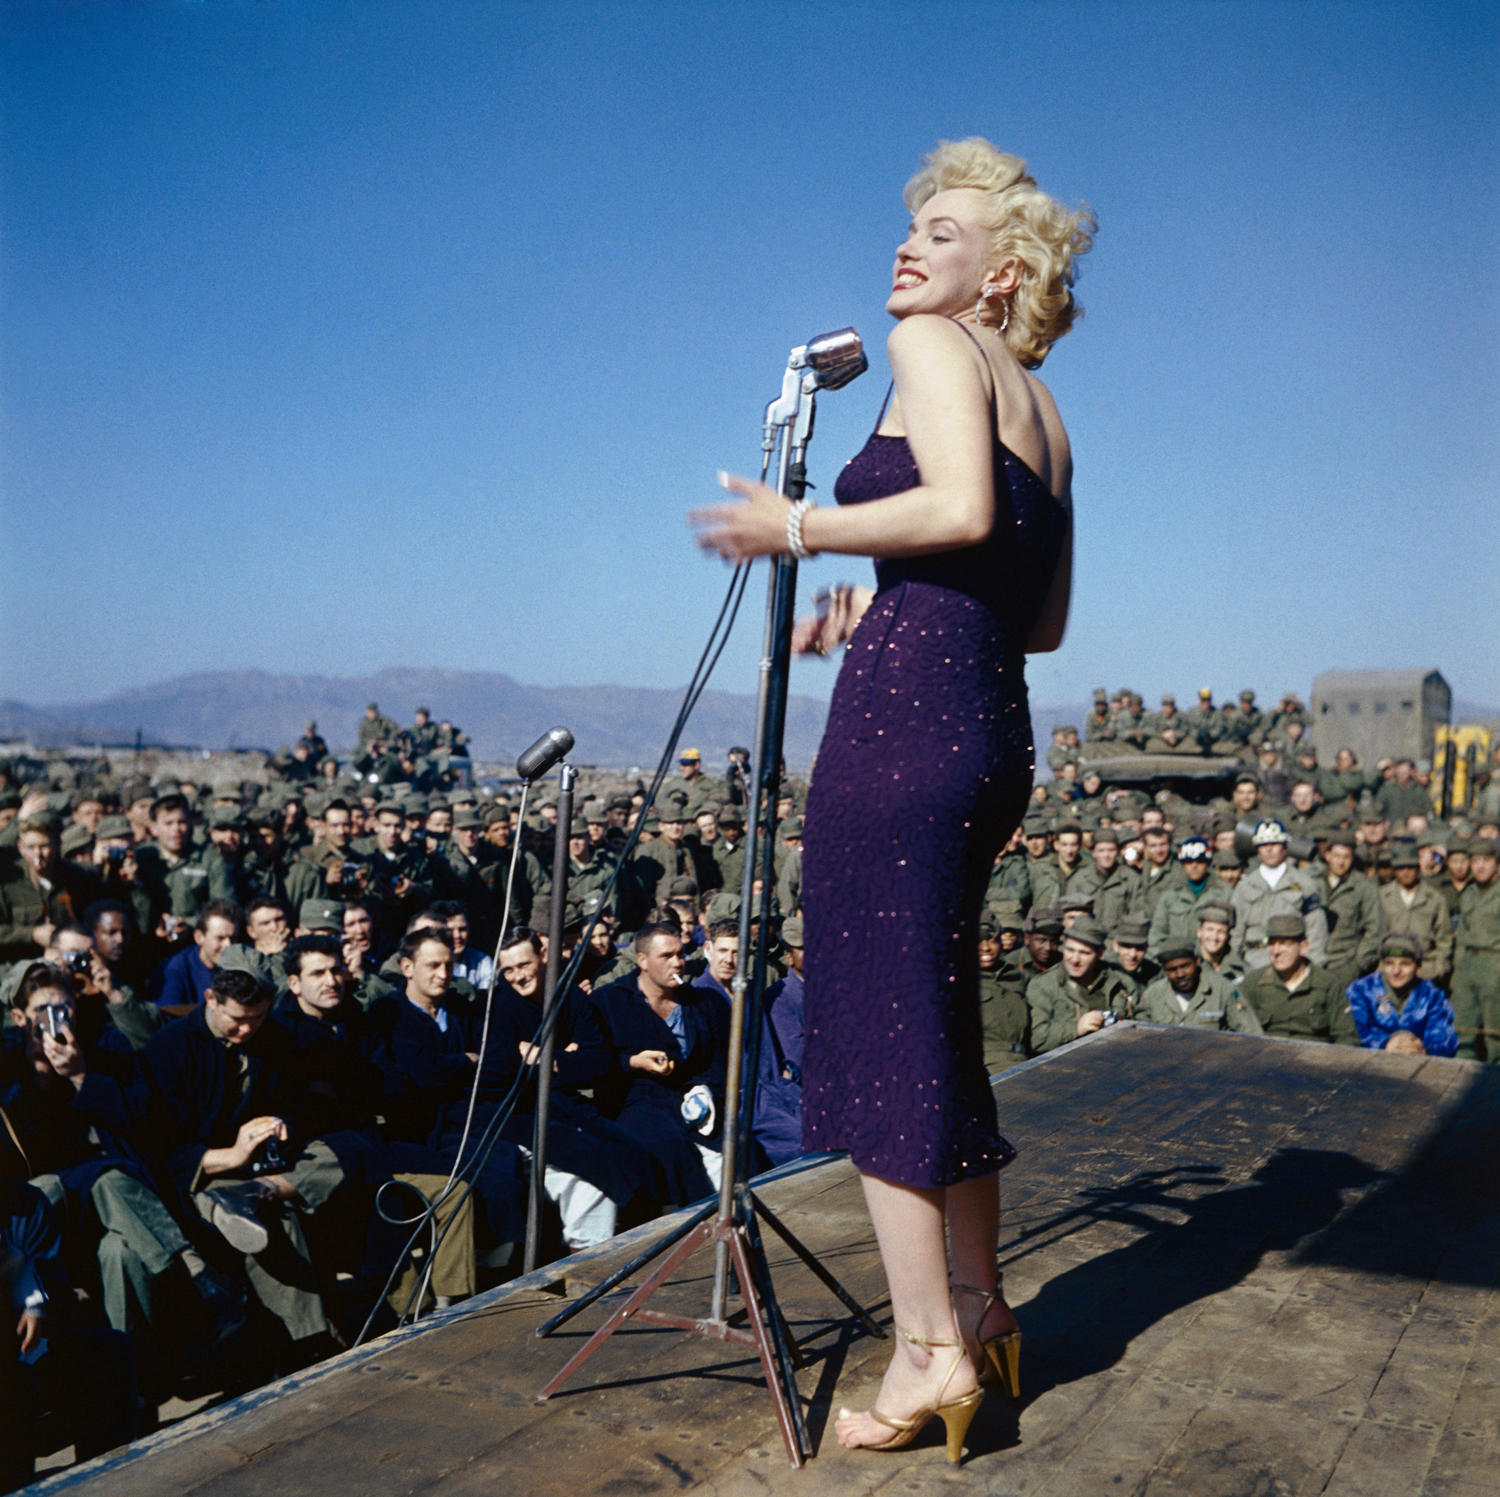 The bombshell chats with U.S. troops in South Korea in February 1954.